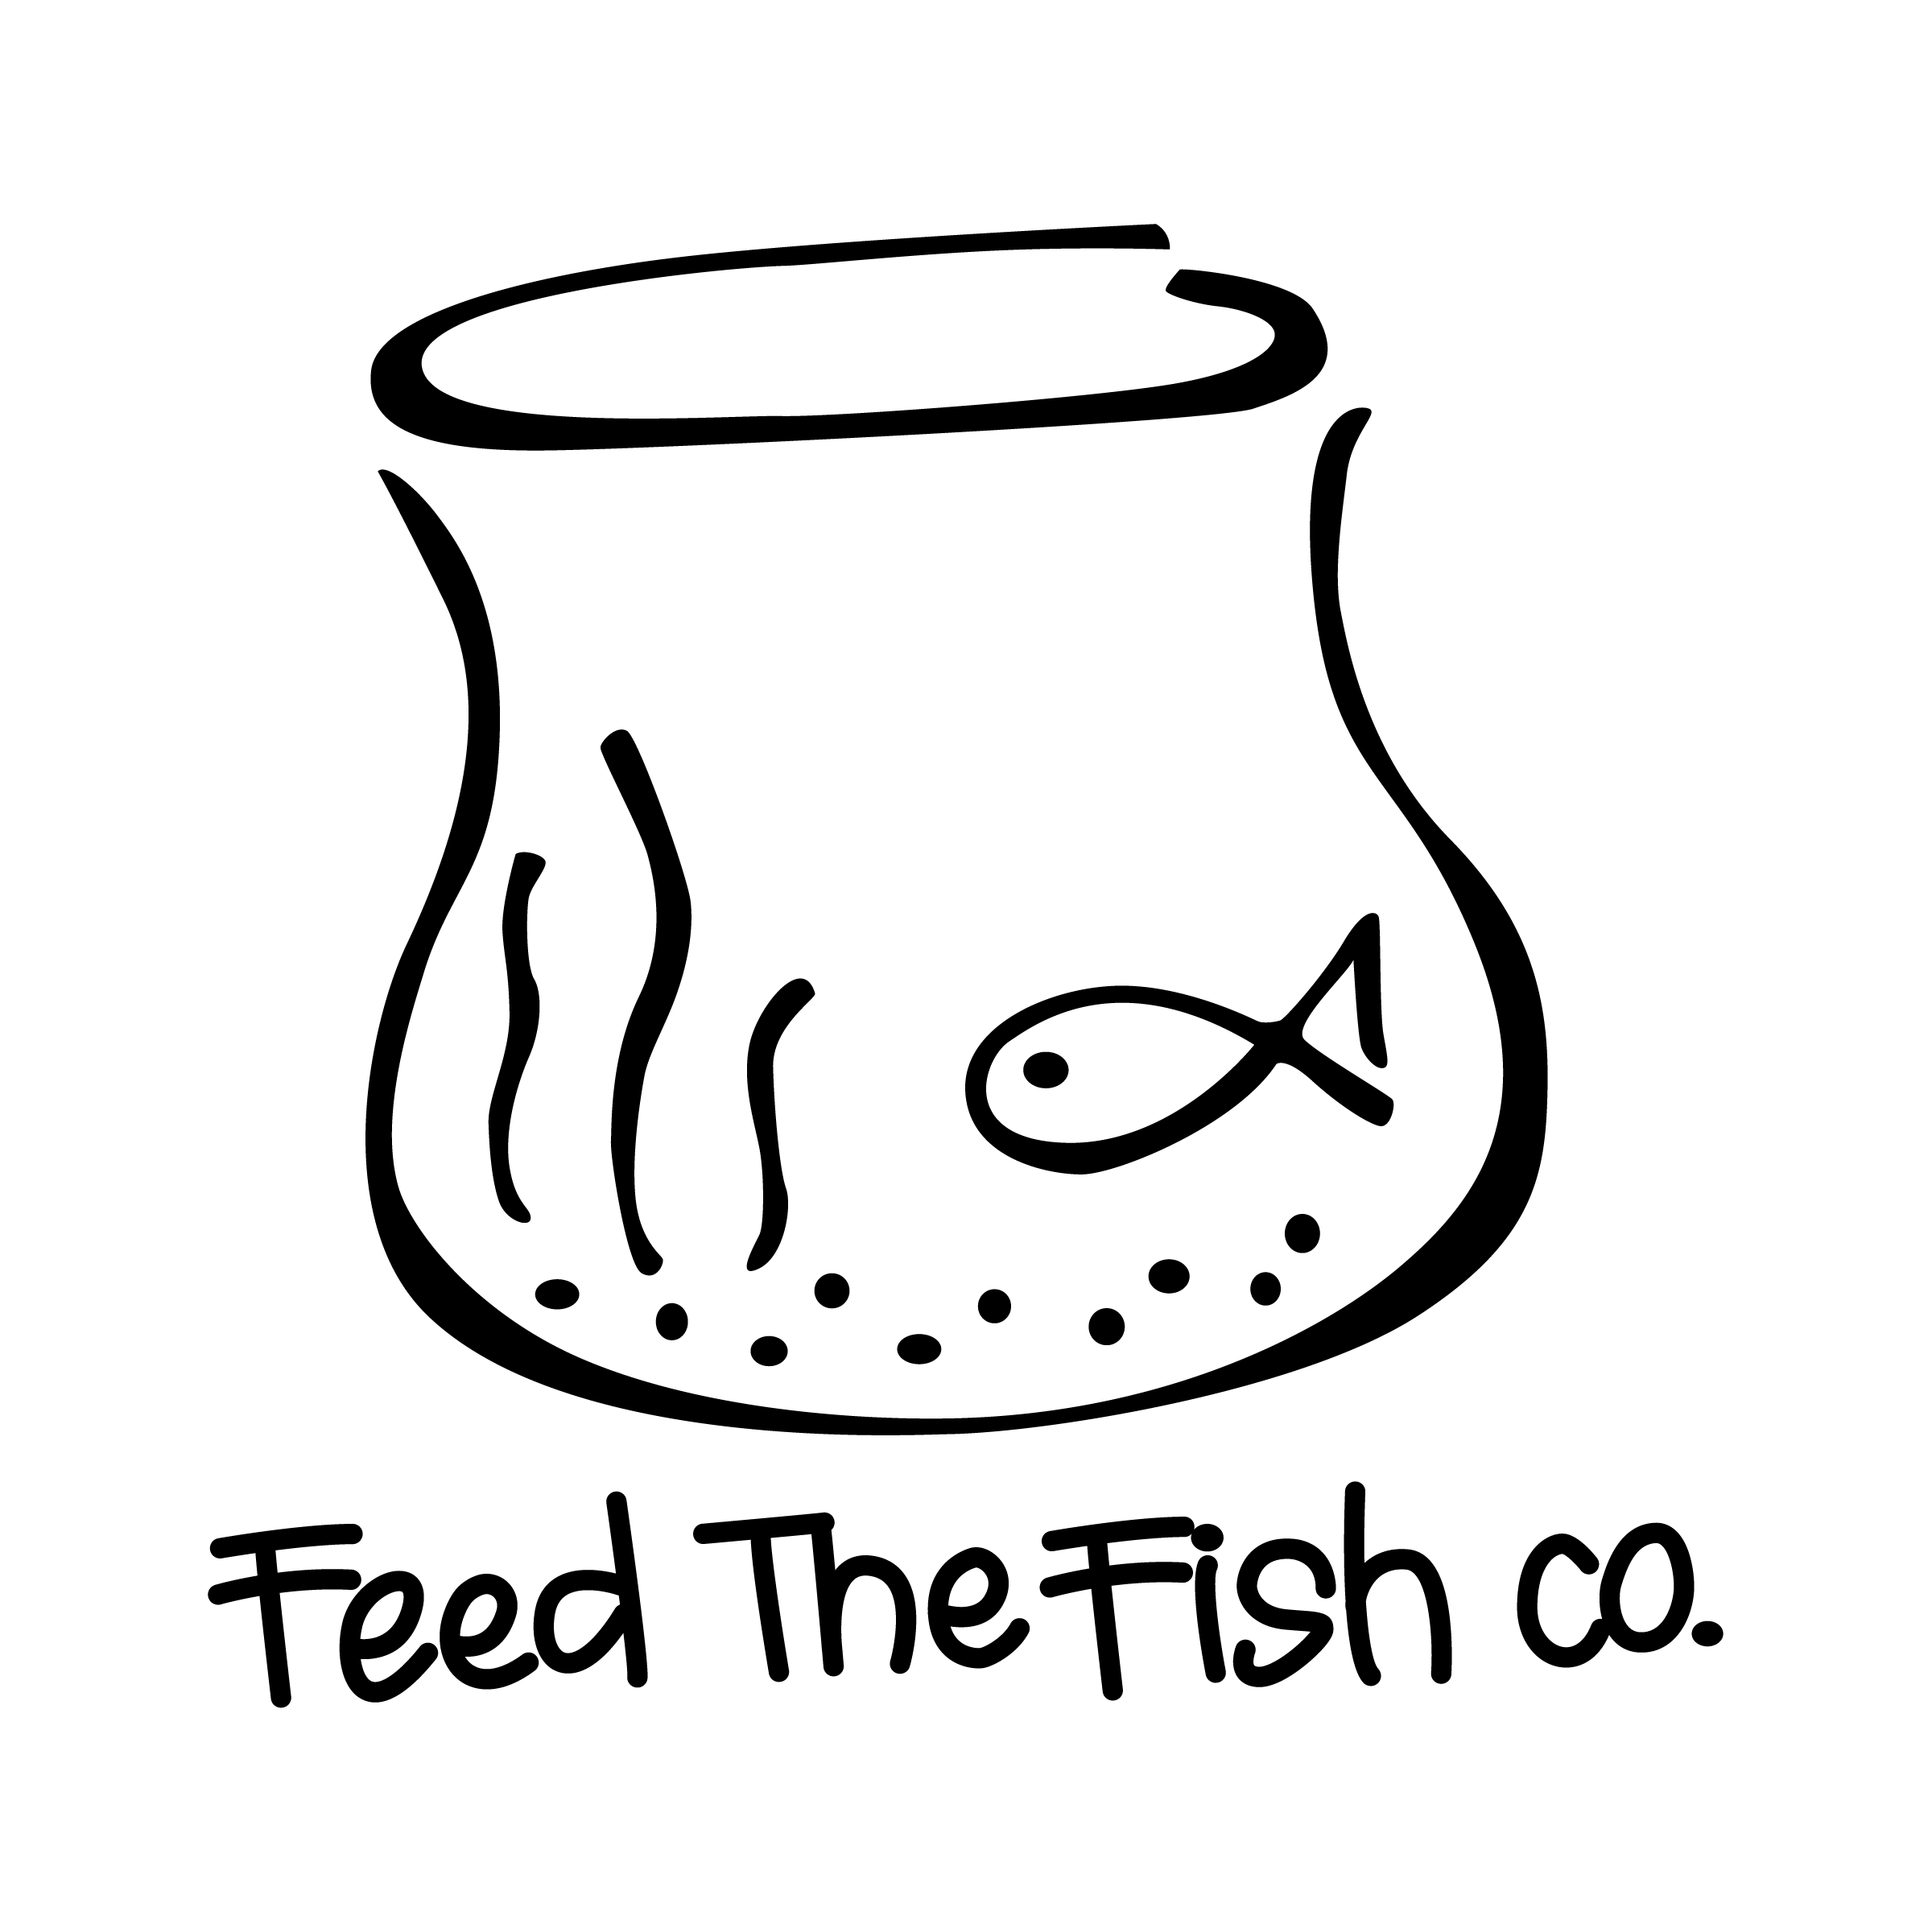 feed-the-fish-co.png